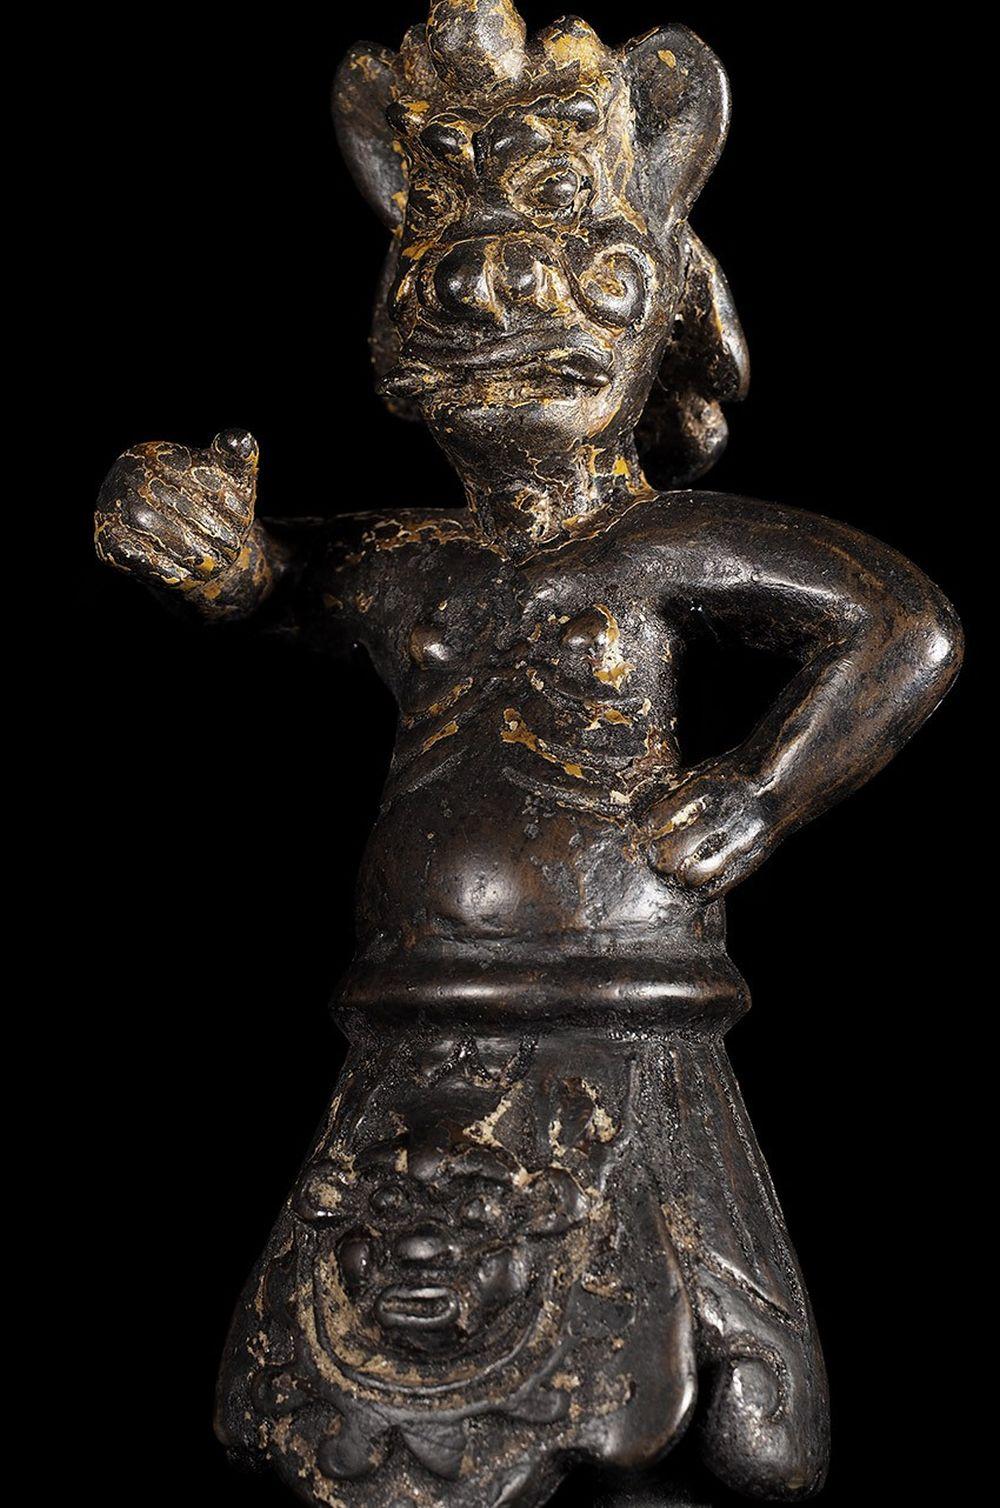 Early Chinese guardian figure. Hard to date because it is so unique, but based on the casting and overall look it appears to be at least 15thC or and possibly much earlier. Lots of personality in this delightful fellow. This piece stands proudly at